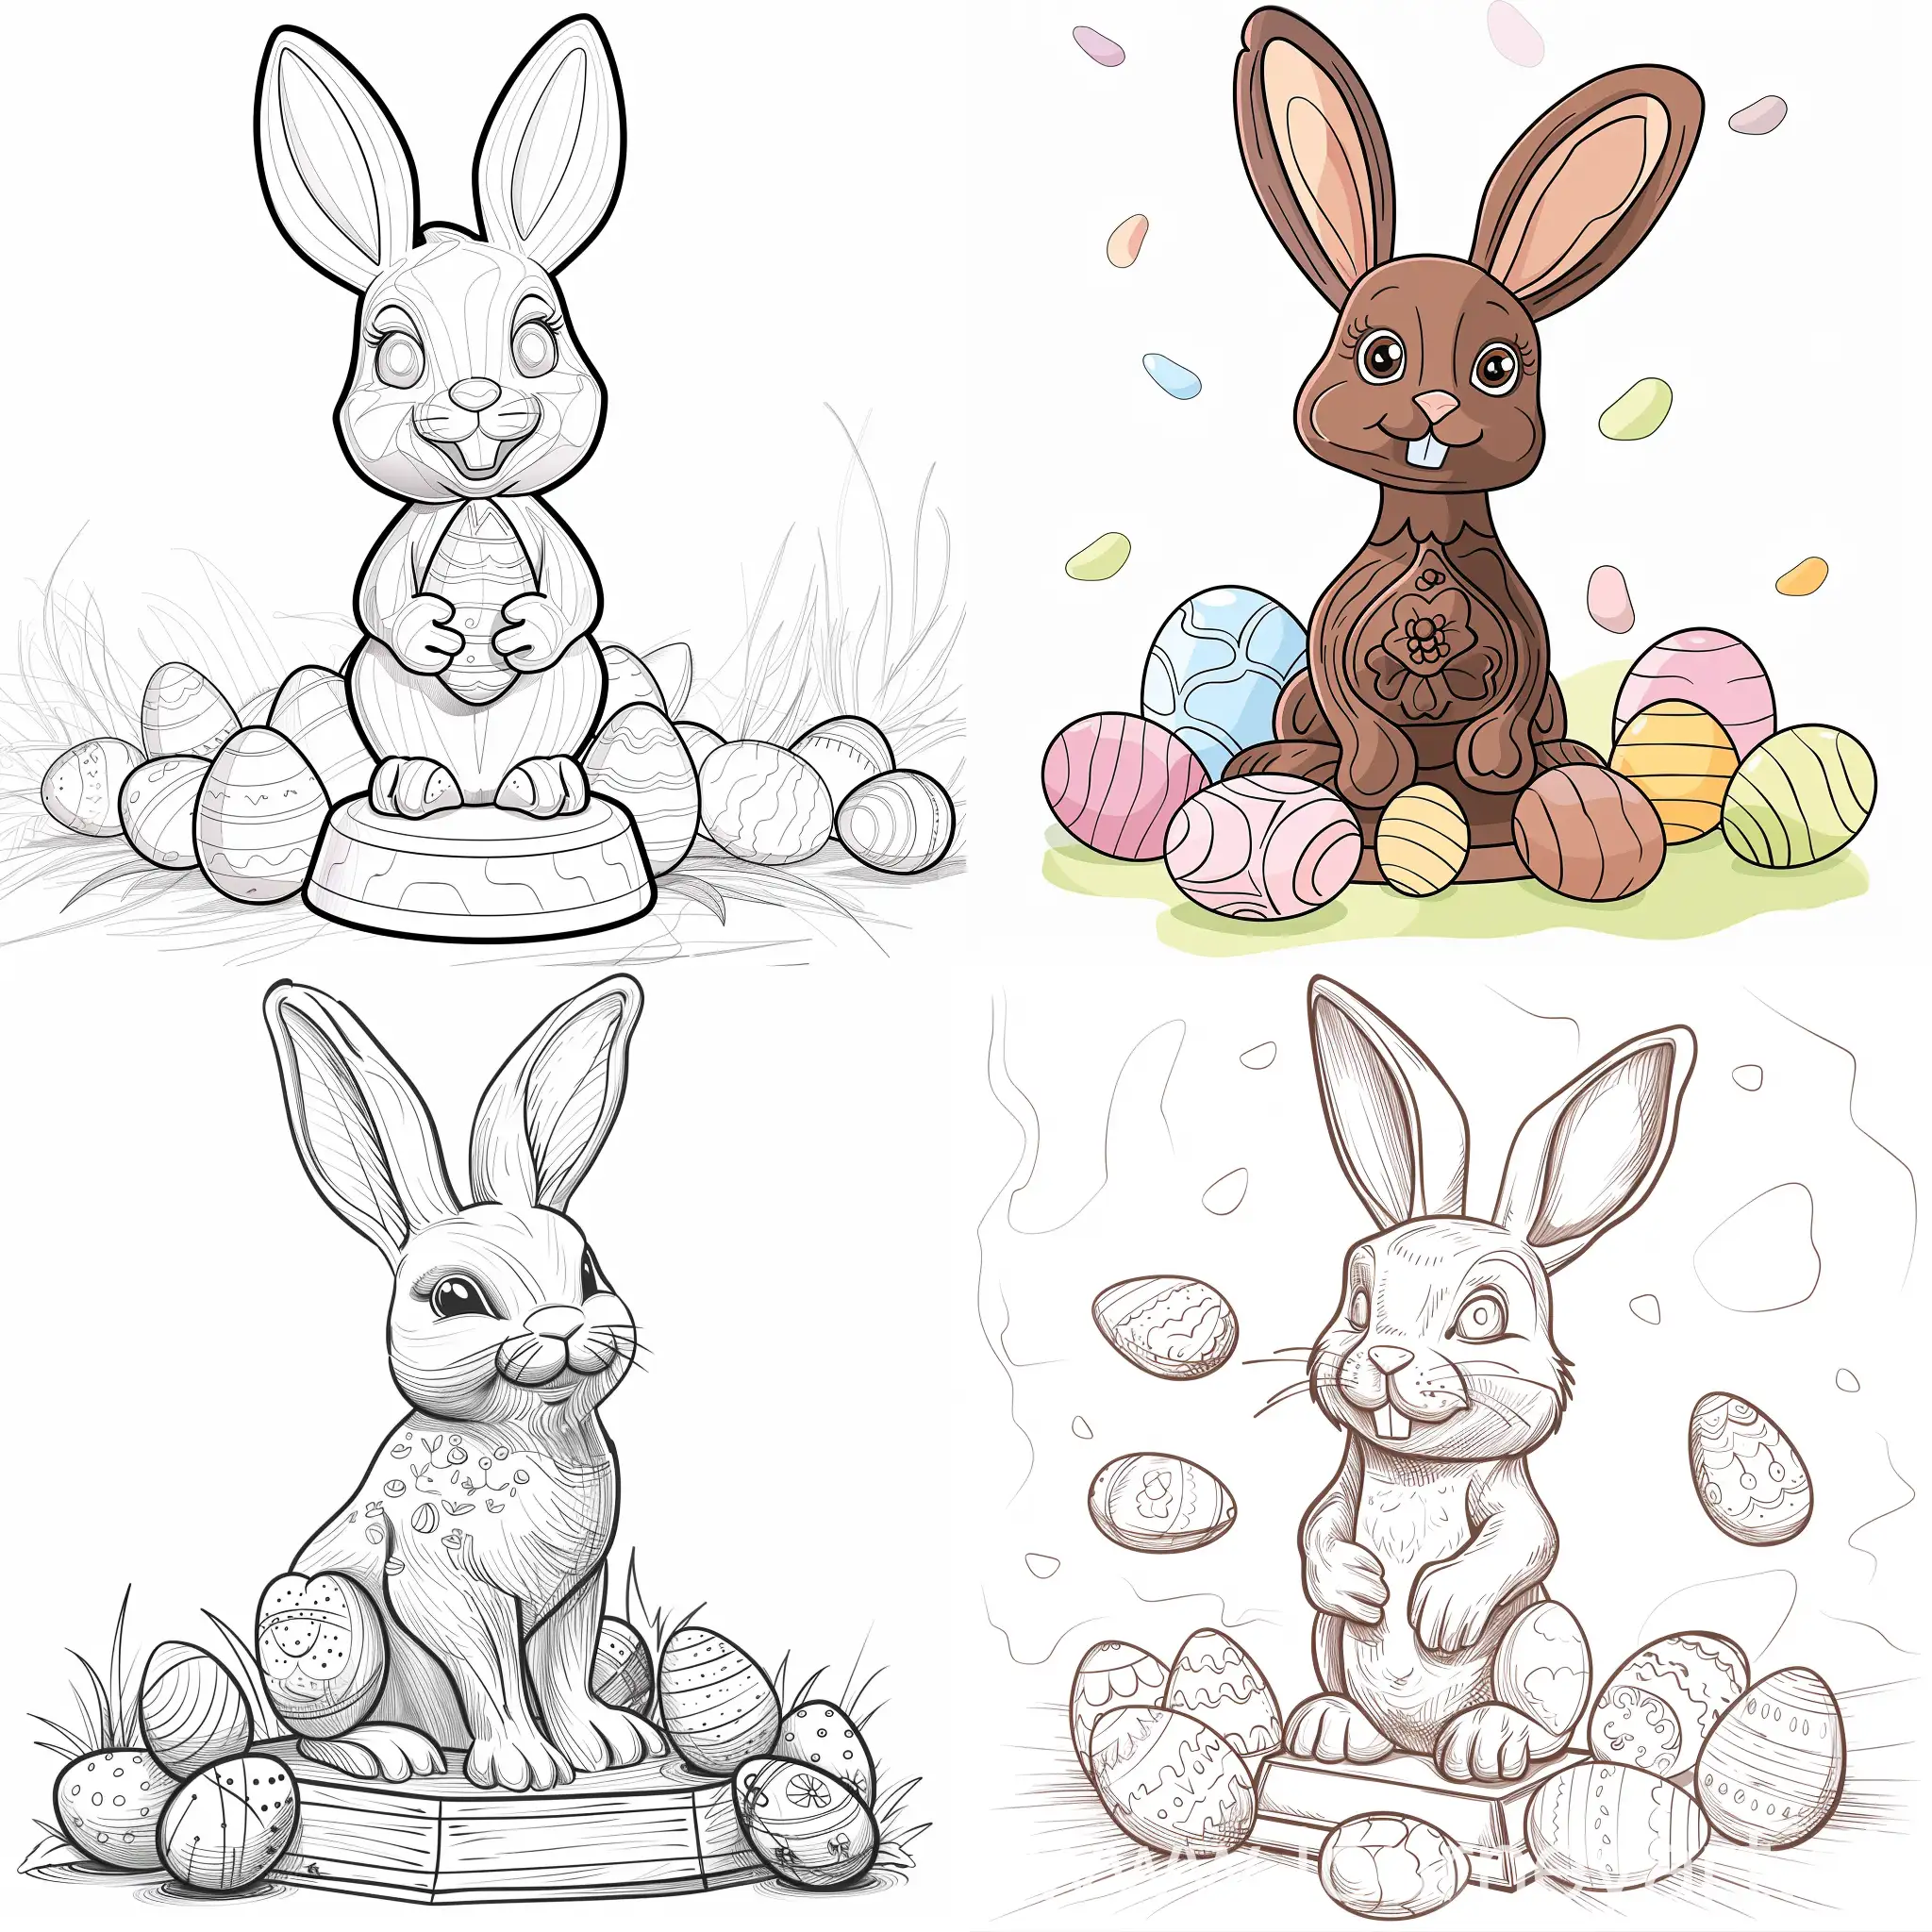 Chocolate-Easter-Bunny-Statue-Surrounded-by-Colorful-Eggs